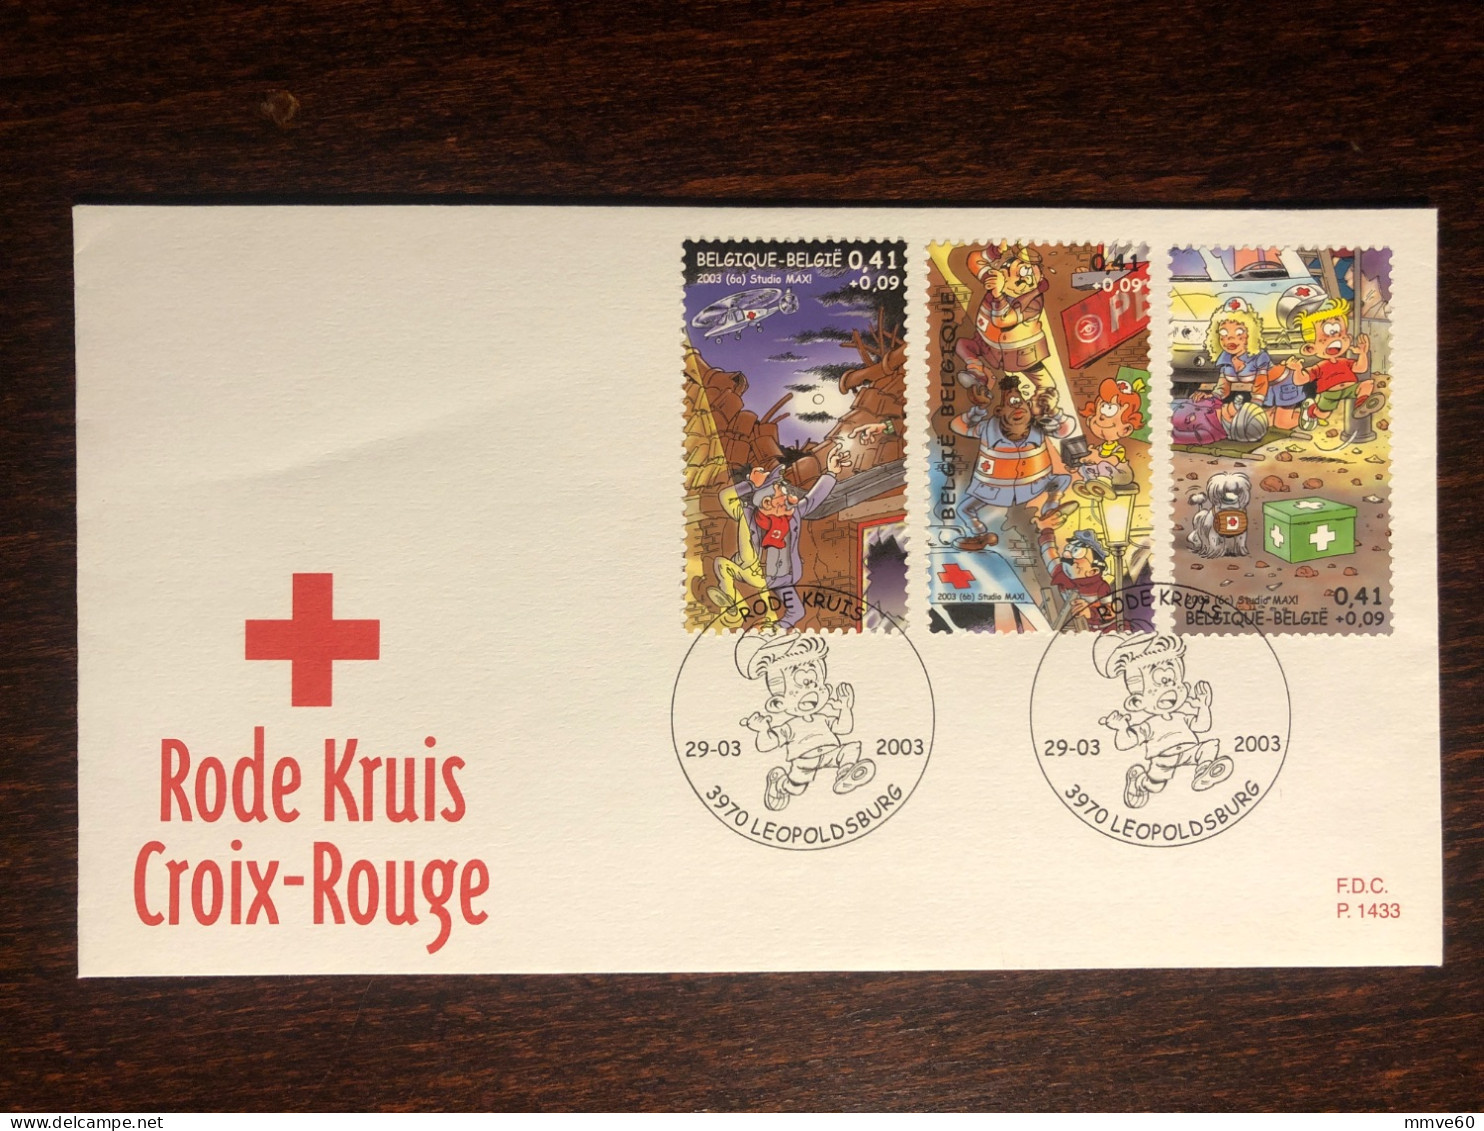 BELGIUM FDC COVER 2003 YEAR RED CROSS HEALTH MEDICINE STAMPS - Covers & Documents